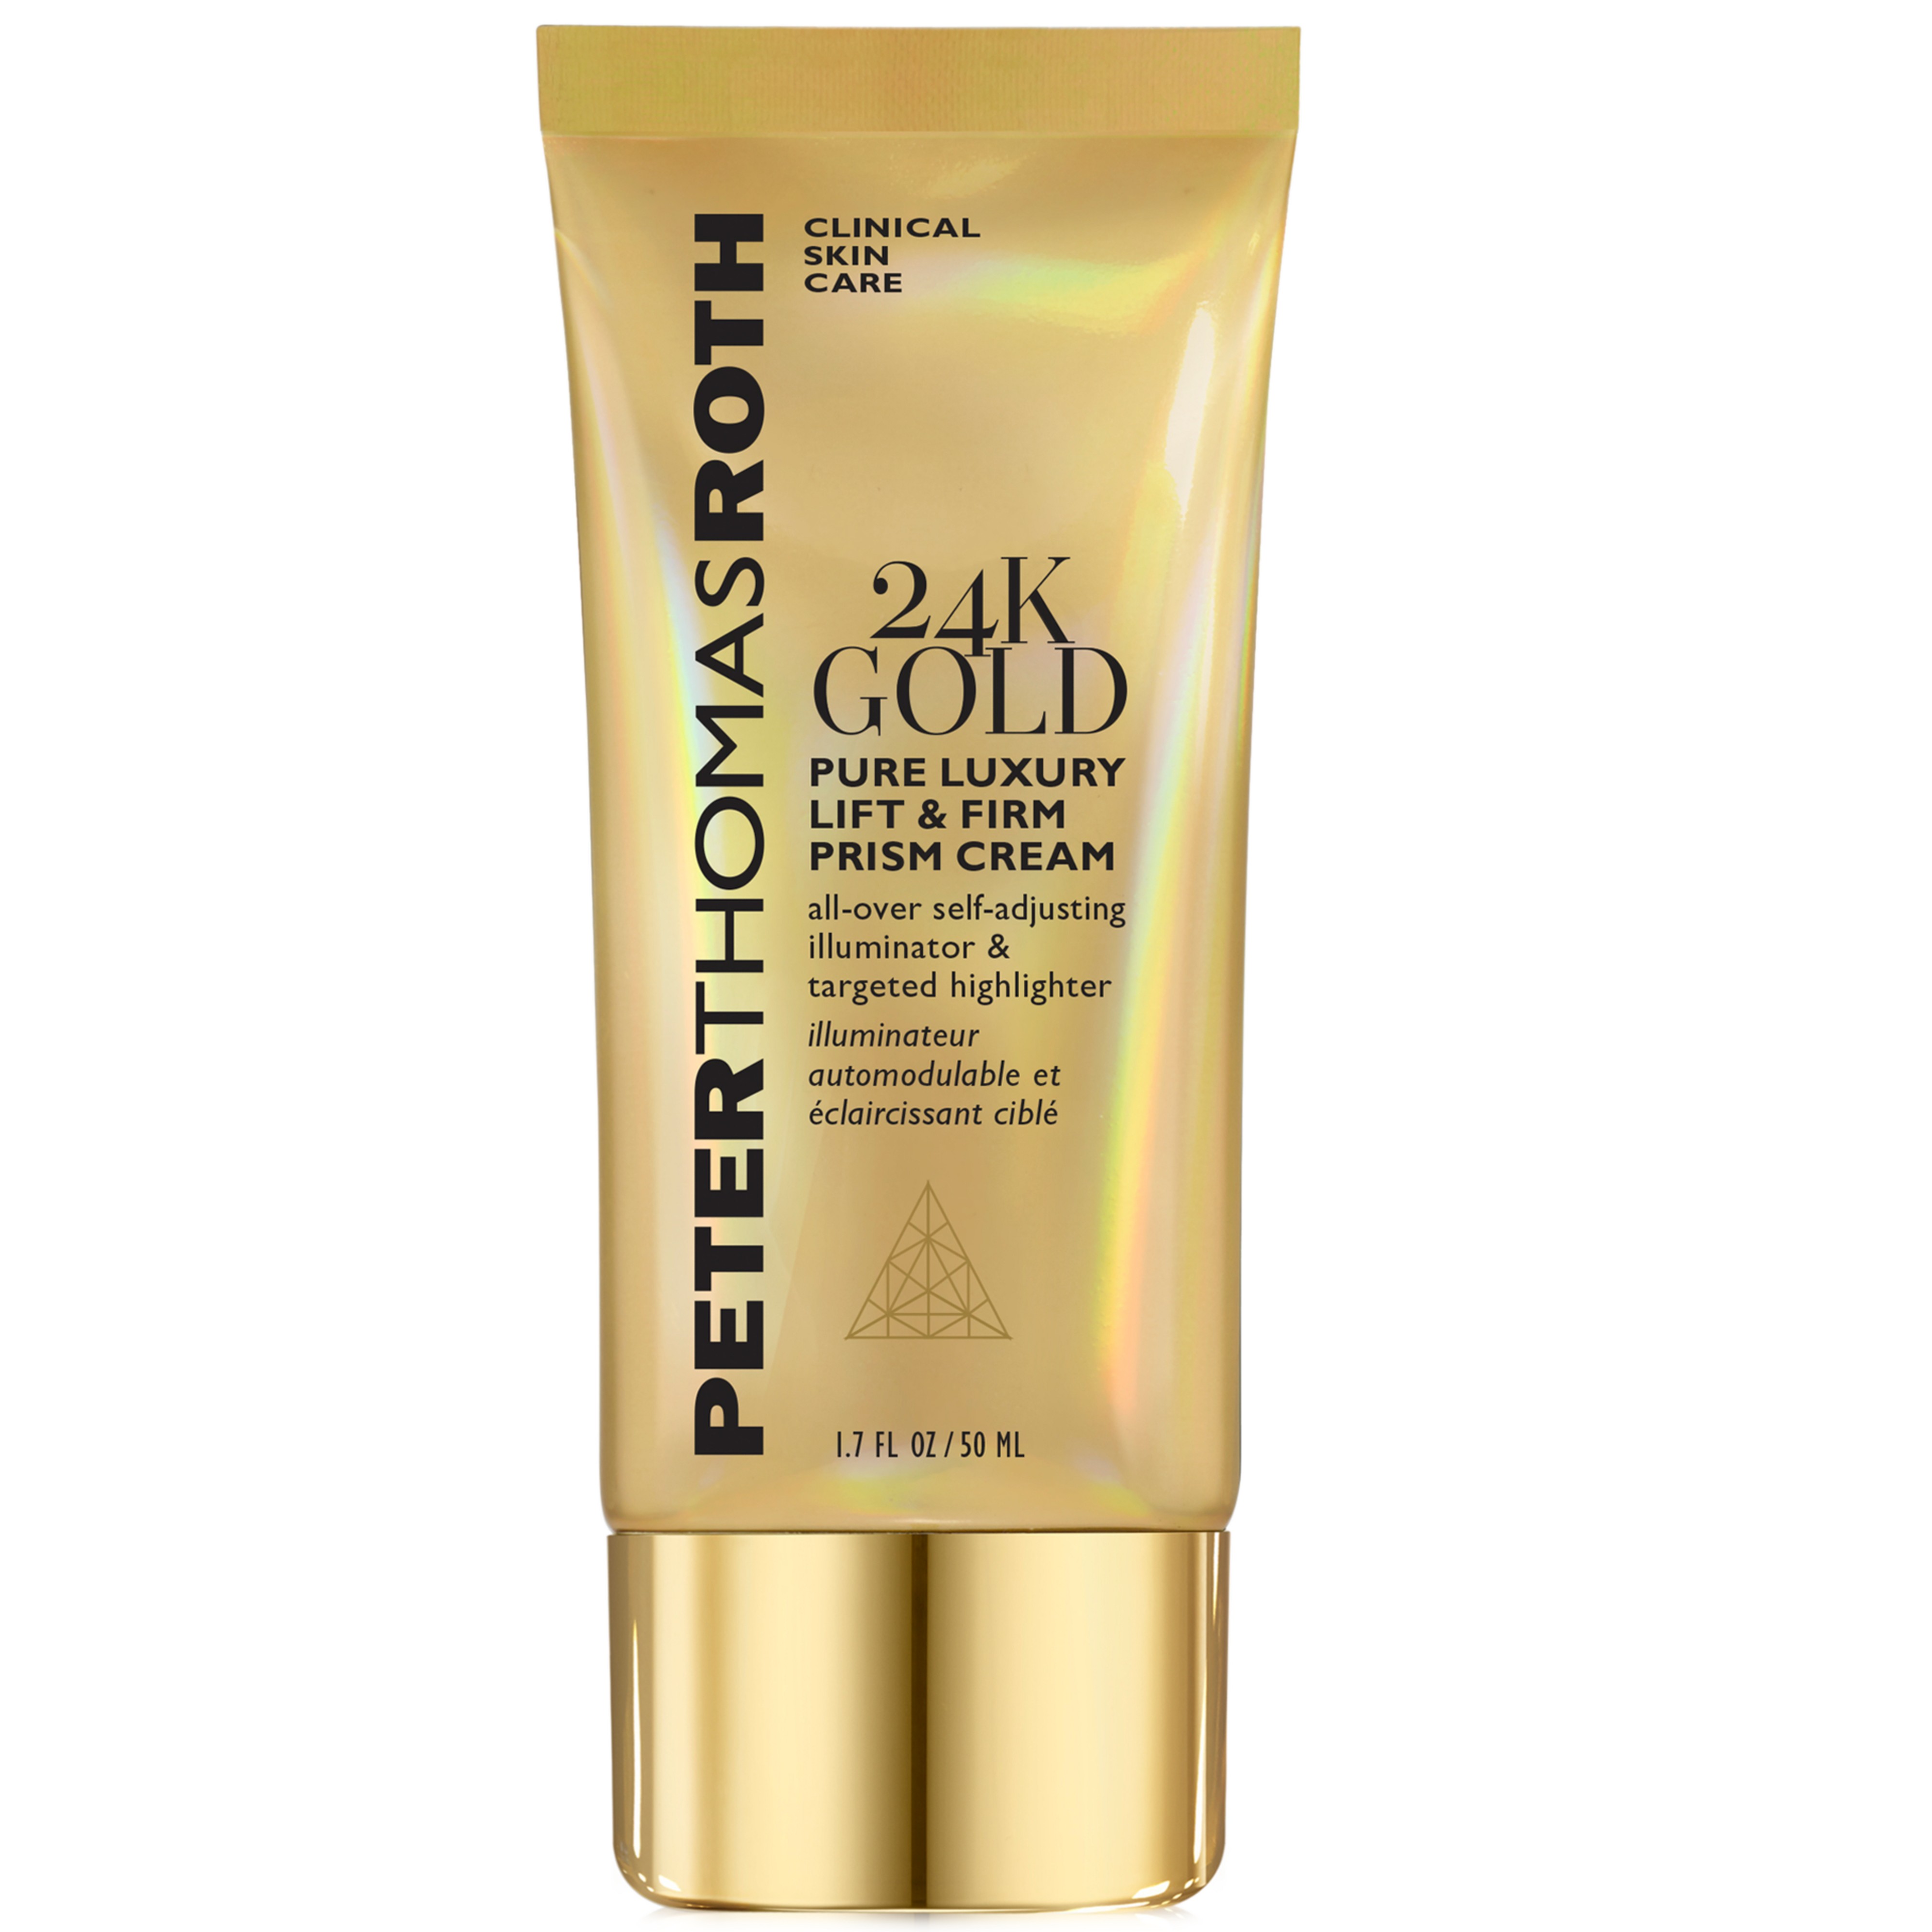 Peter Thomas Roth 24K Gold Pure Luxury Lift & Firm Prism Face Cream 1.7 oz. - image 1 of 2